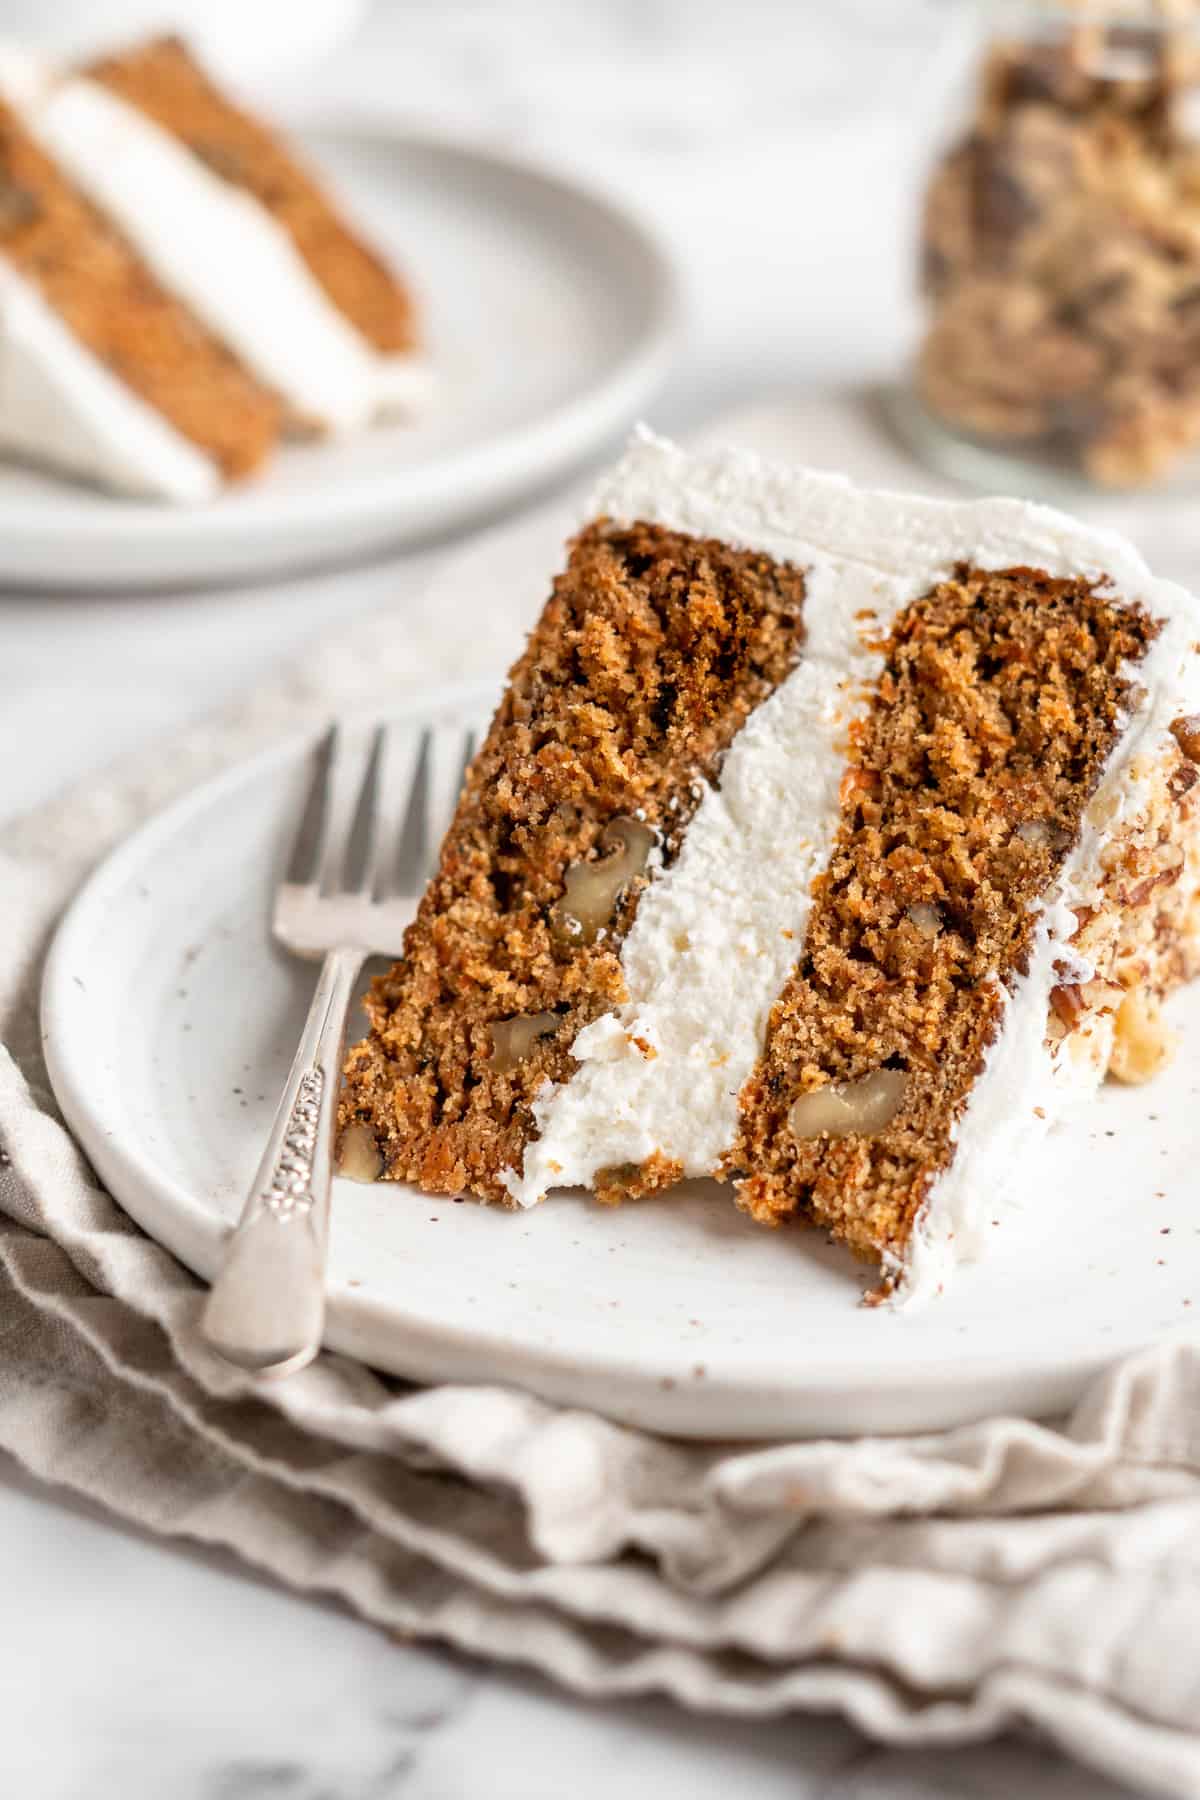 Closeup of vegan carrot cake slice on white plate with fork